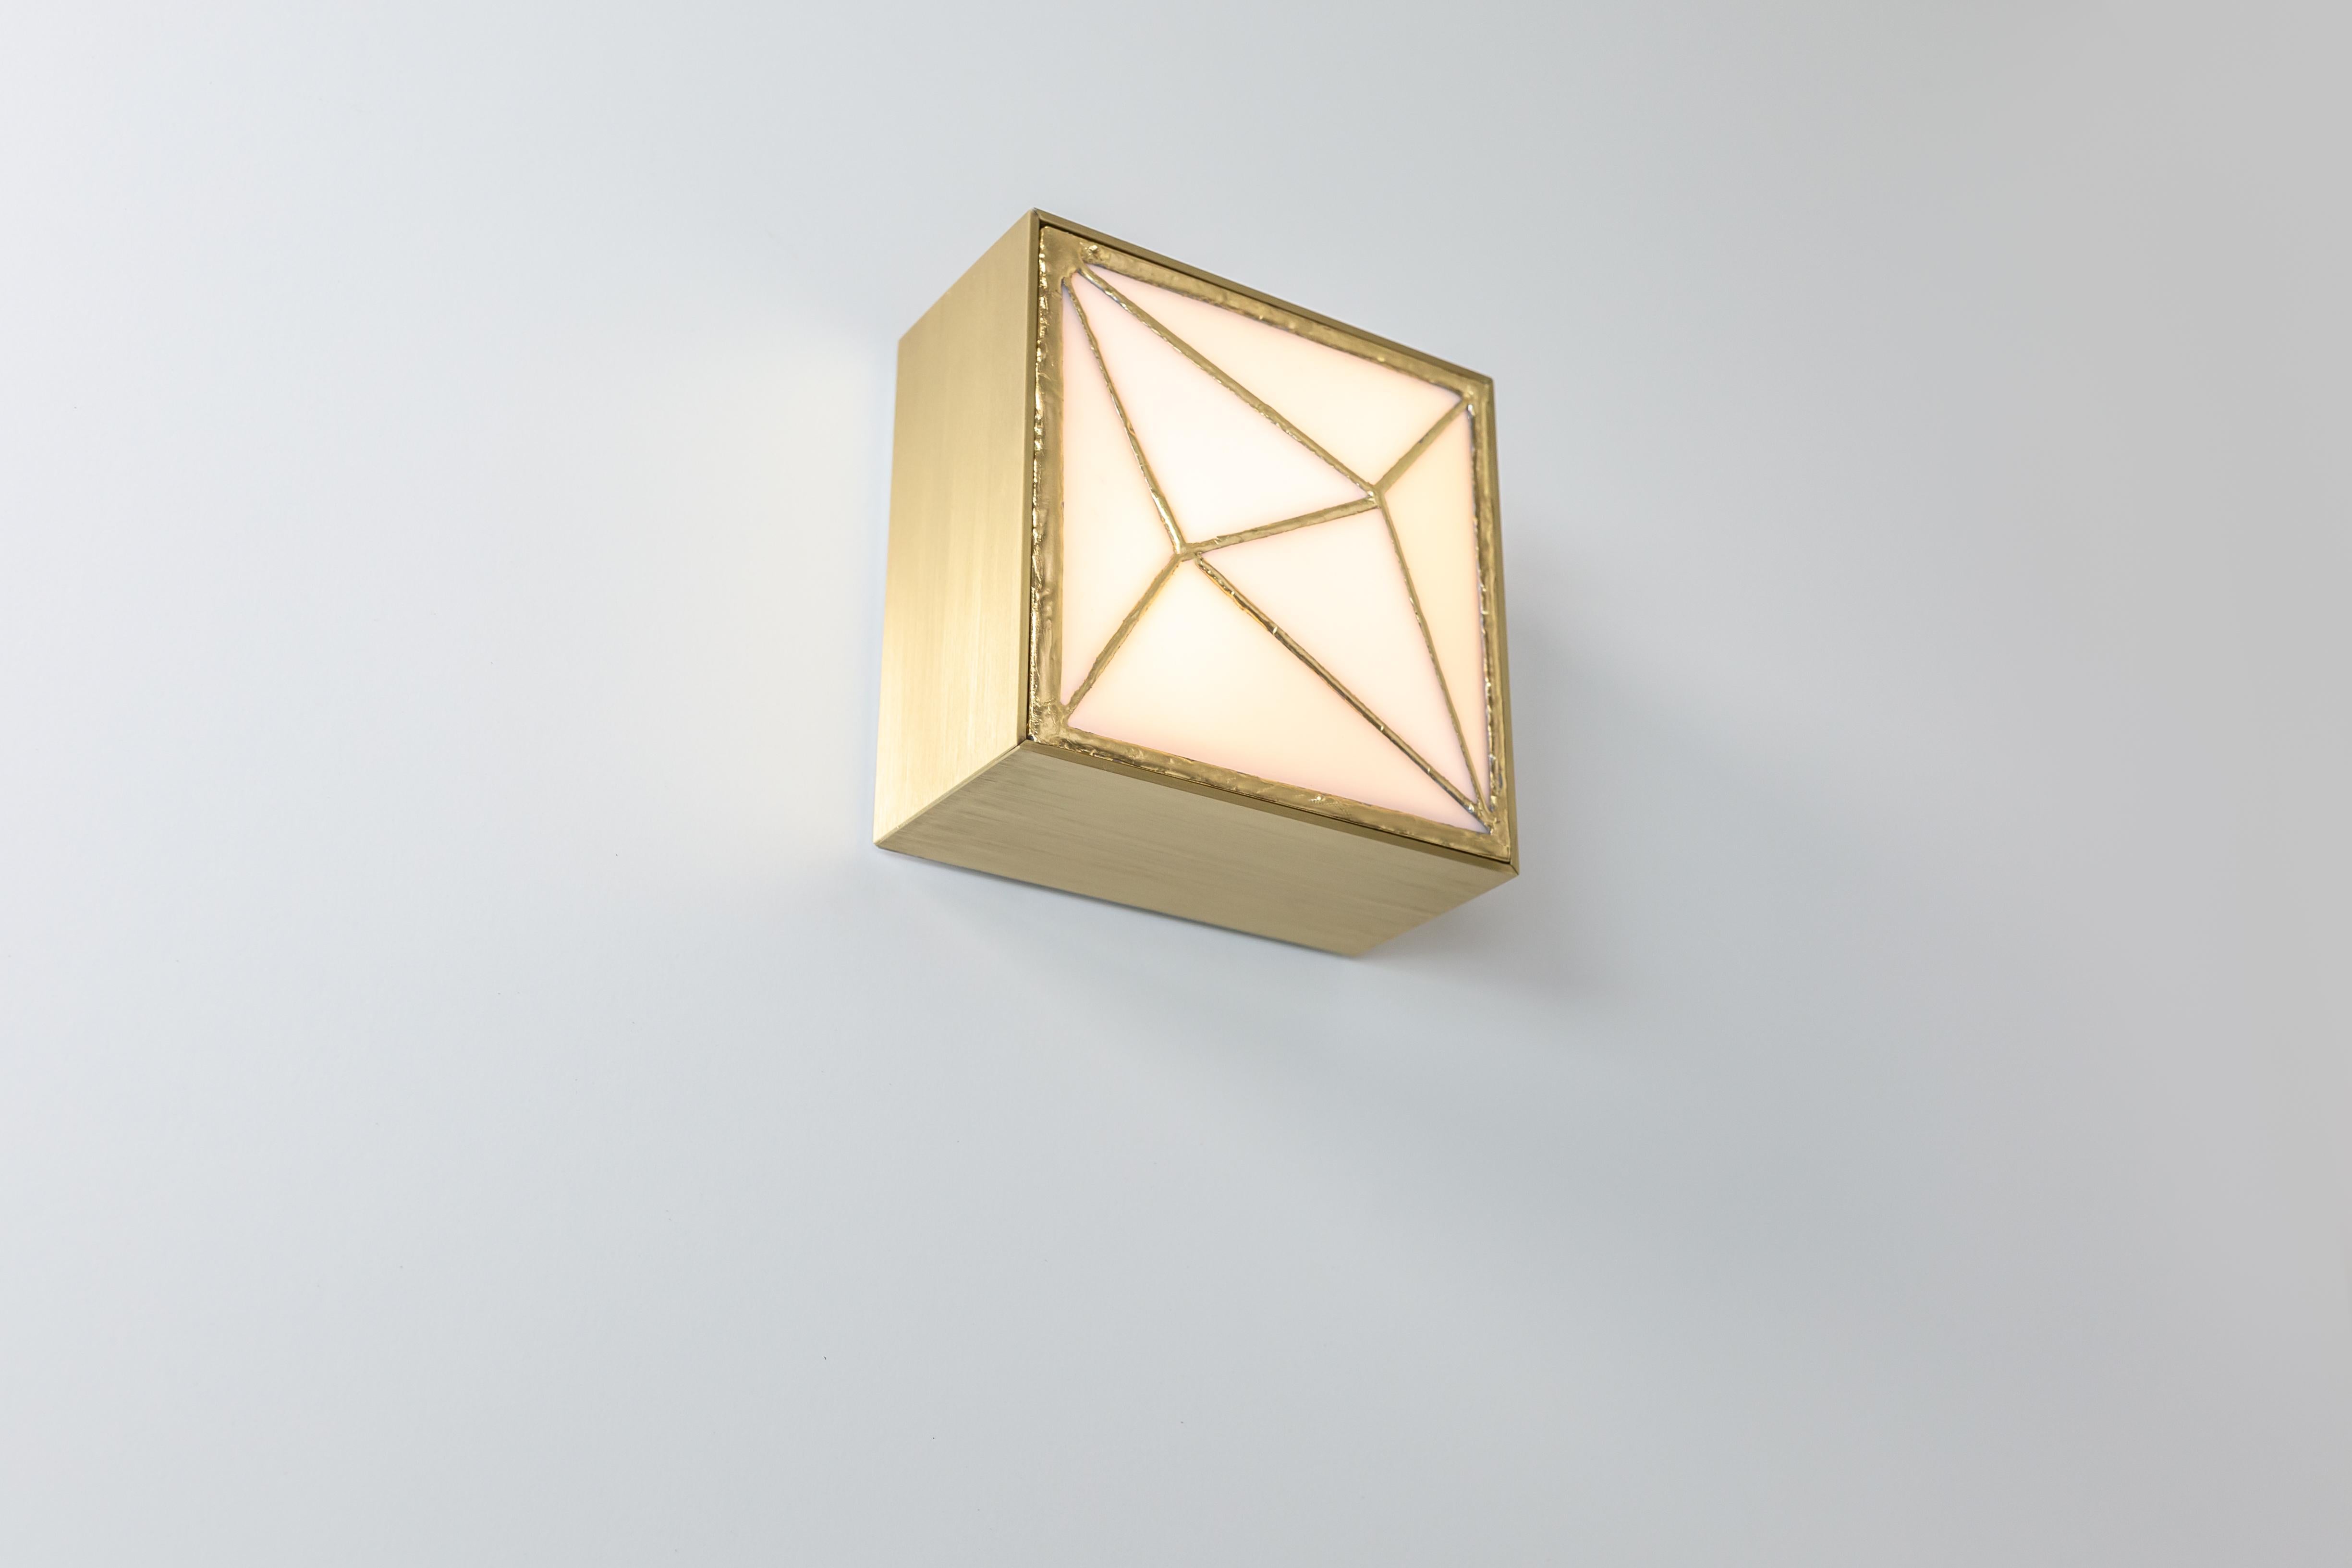 Kalin Asenov designs and fabricates lighting in Savannah, GA. Asenov works with a team of artisans and manufacturers to prototype, and build all pieces in his studio.
 
Asenov’s designs are driven by narrative, every object is an expression of a